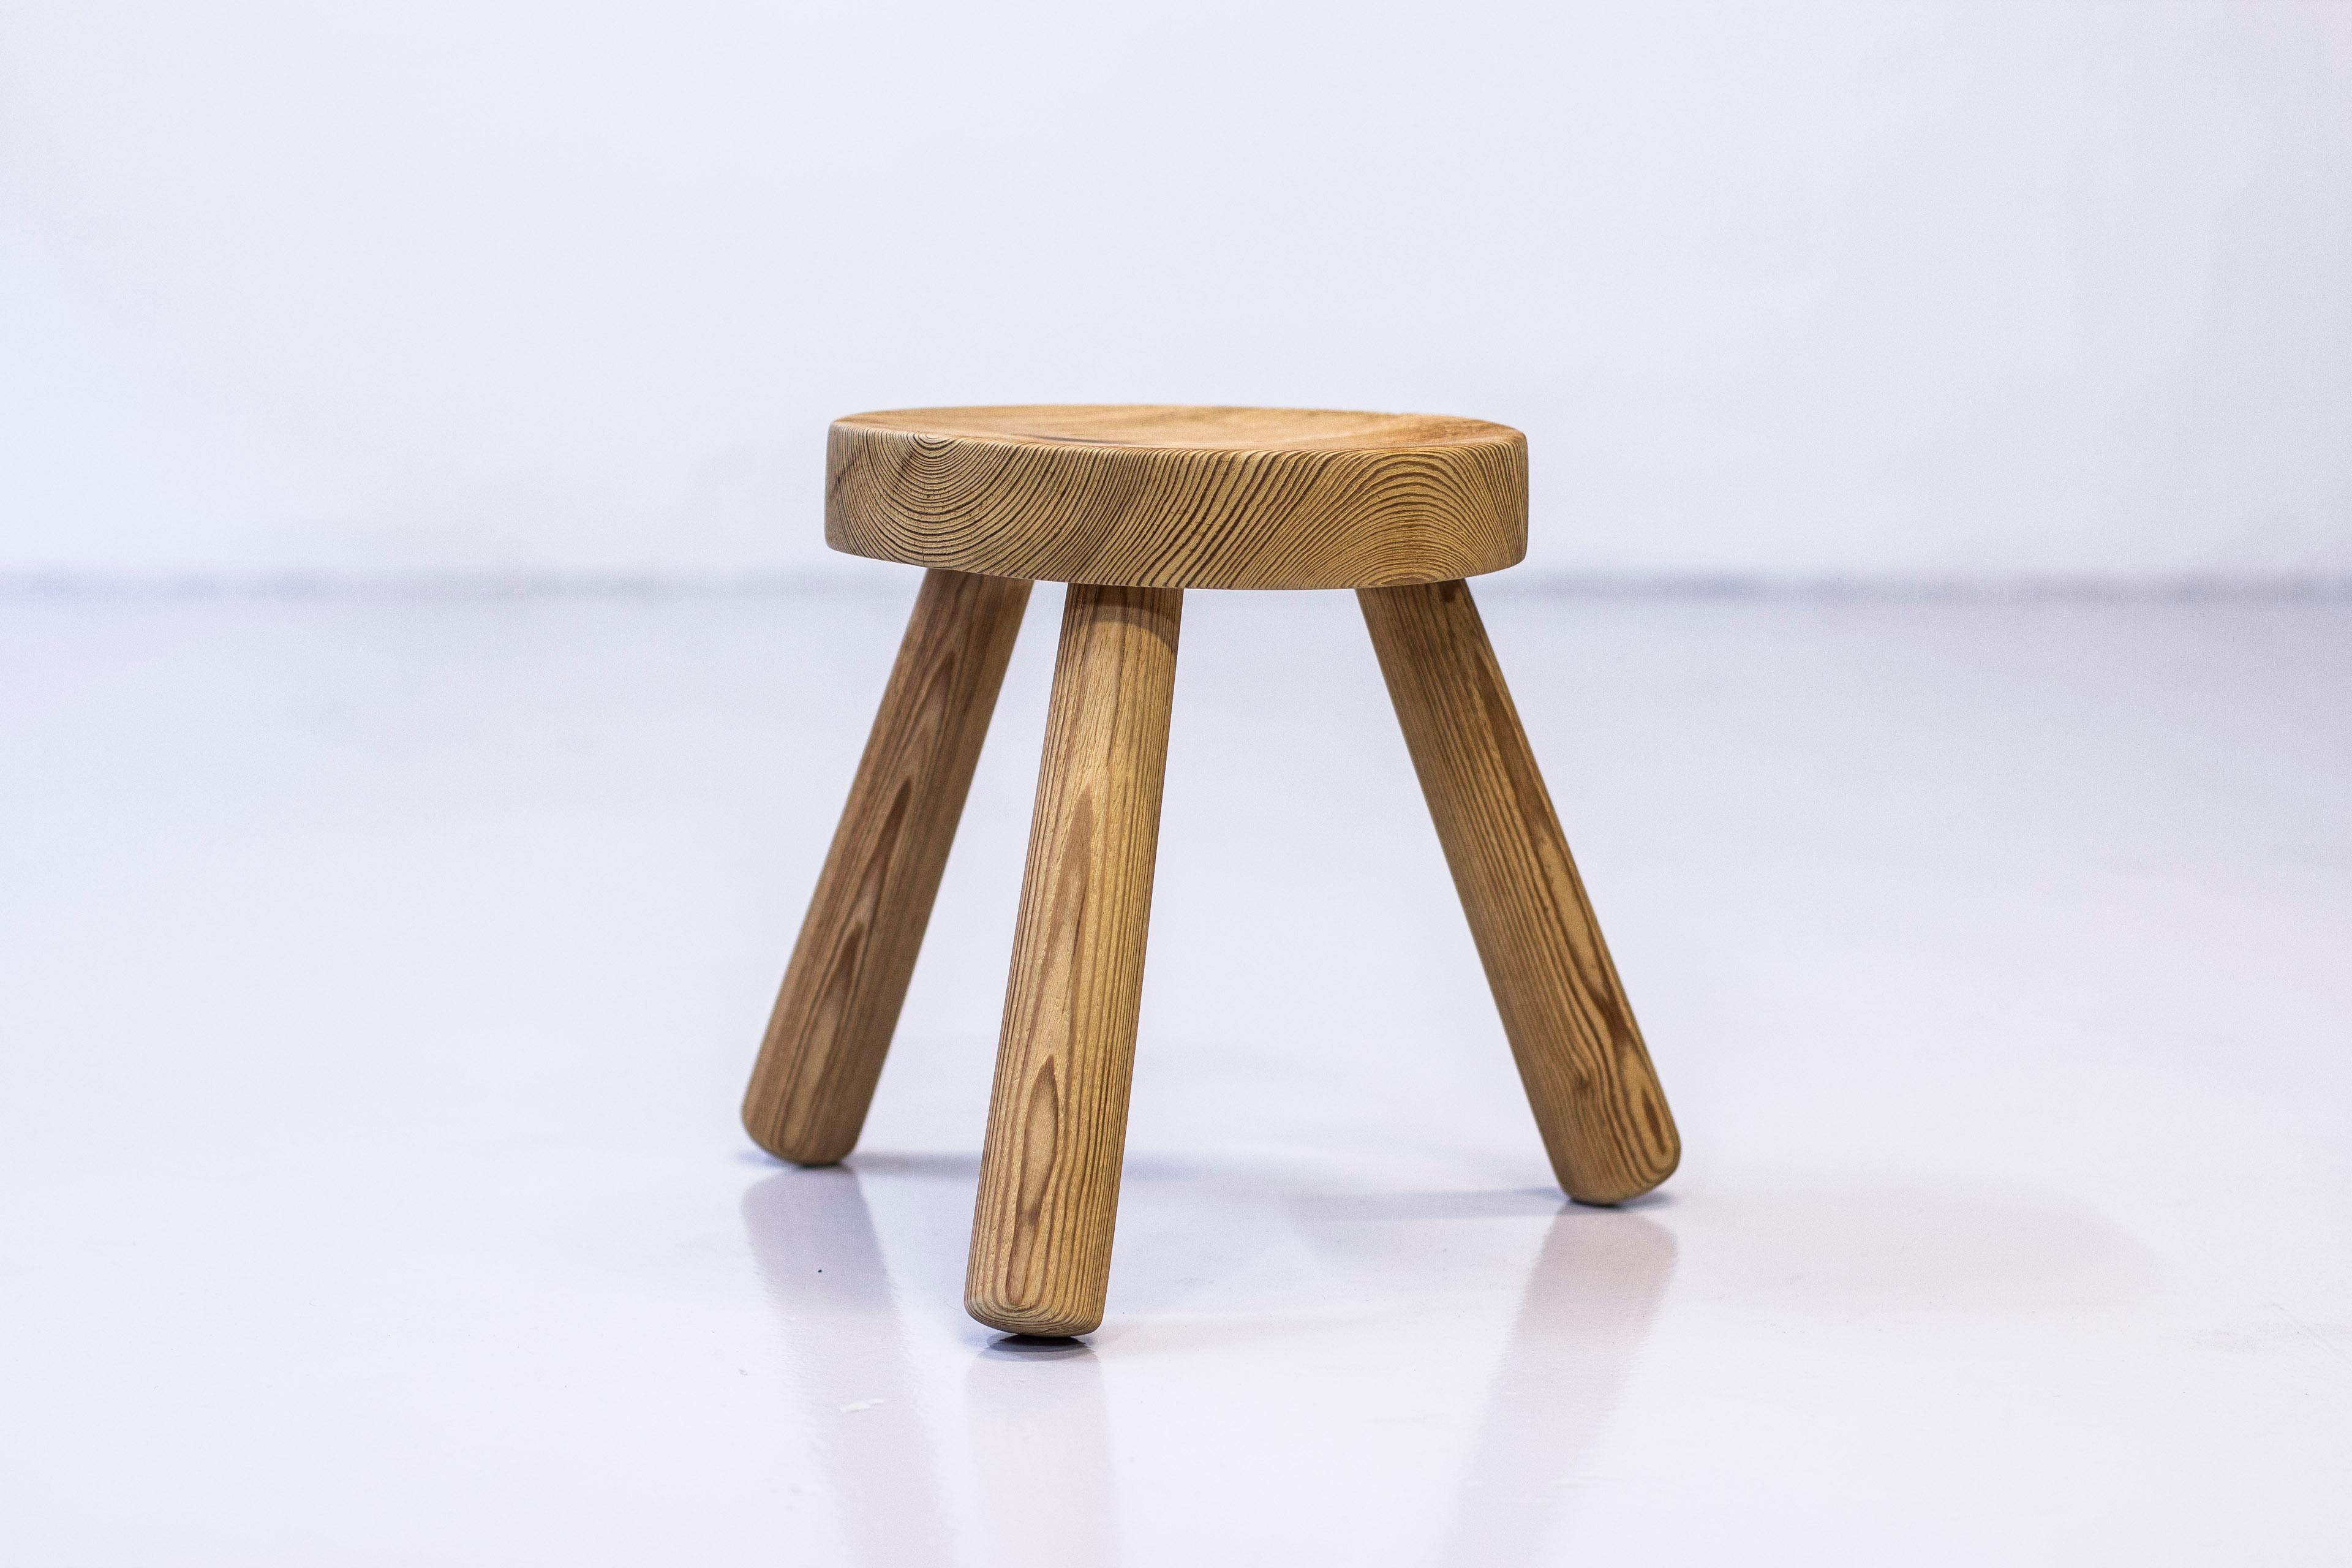 Stool designed by Ingvar Hildingsson. Produced by himself in the 1940s. Made from solid untreated, brushed pine. Very good condition with few signs of wear and patina.
 